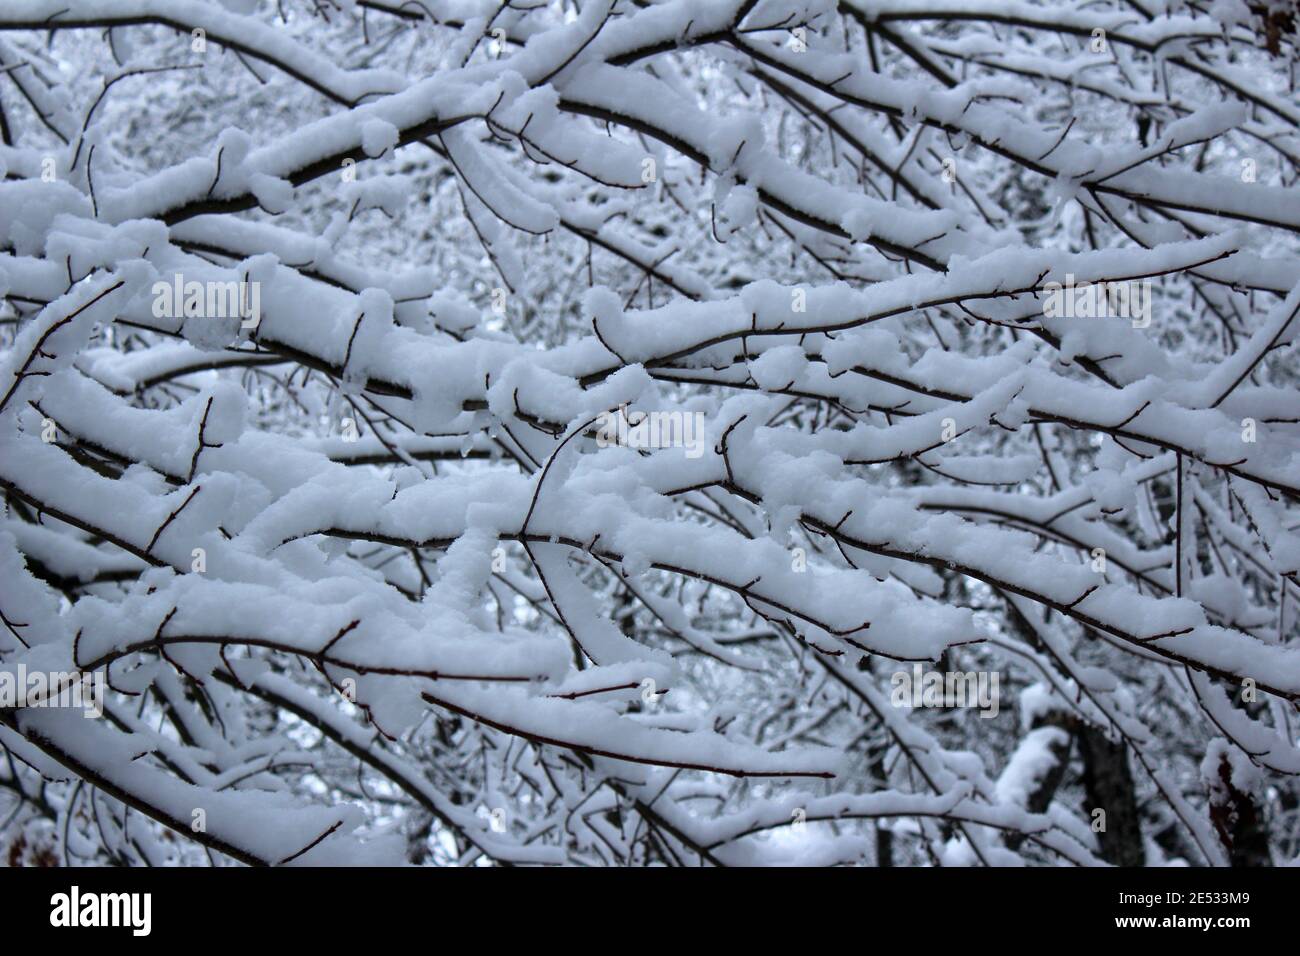 Heavy Snow Coats The Branches of a Tree Stock Photo